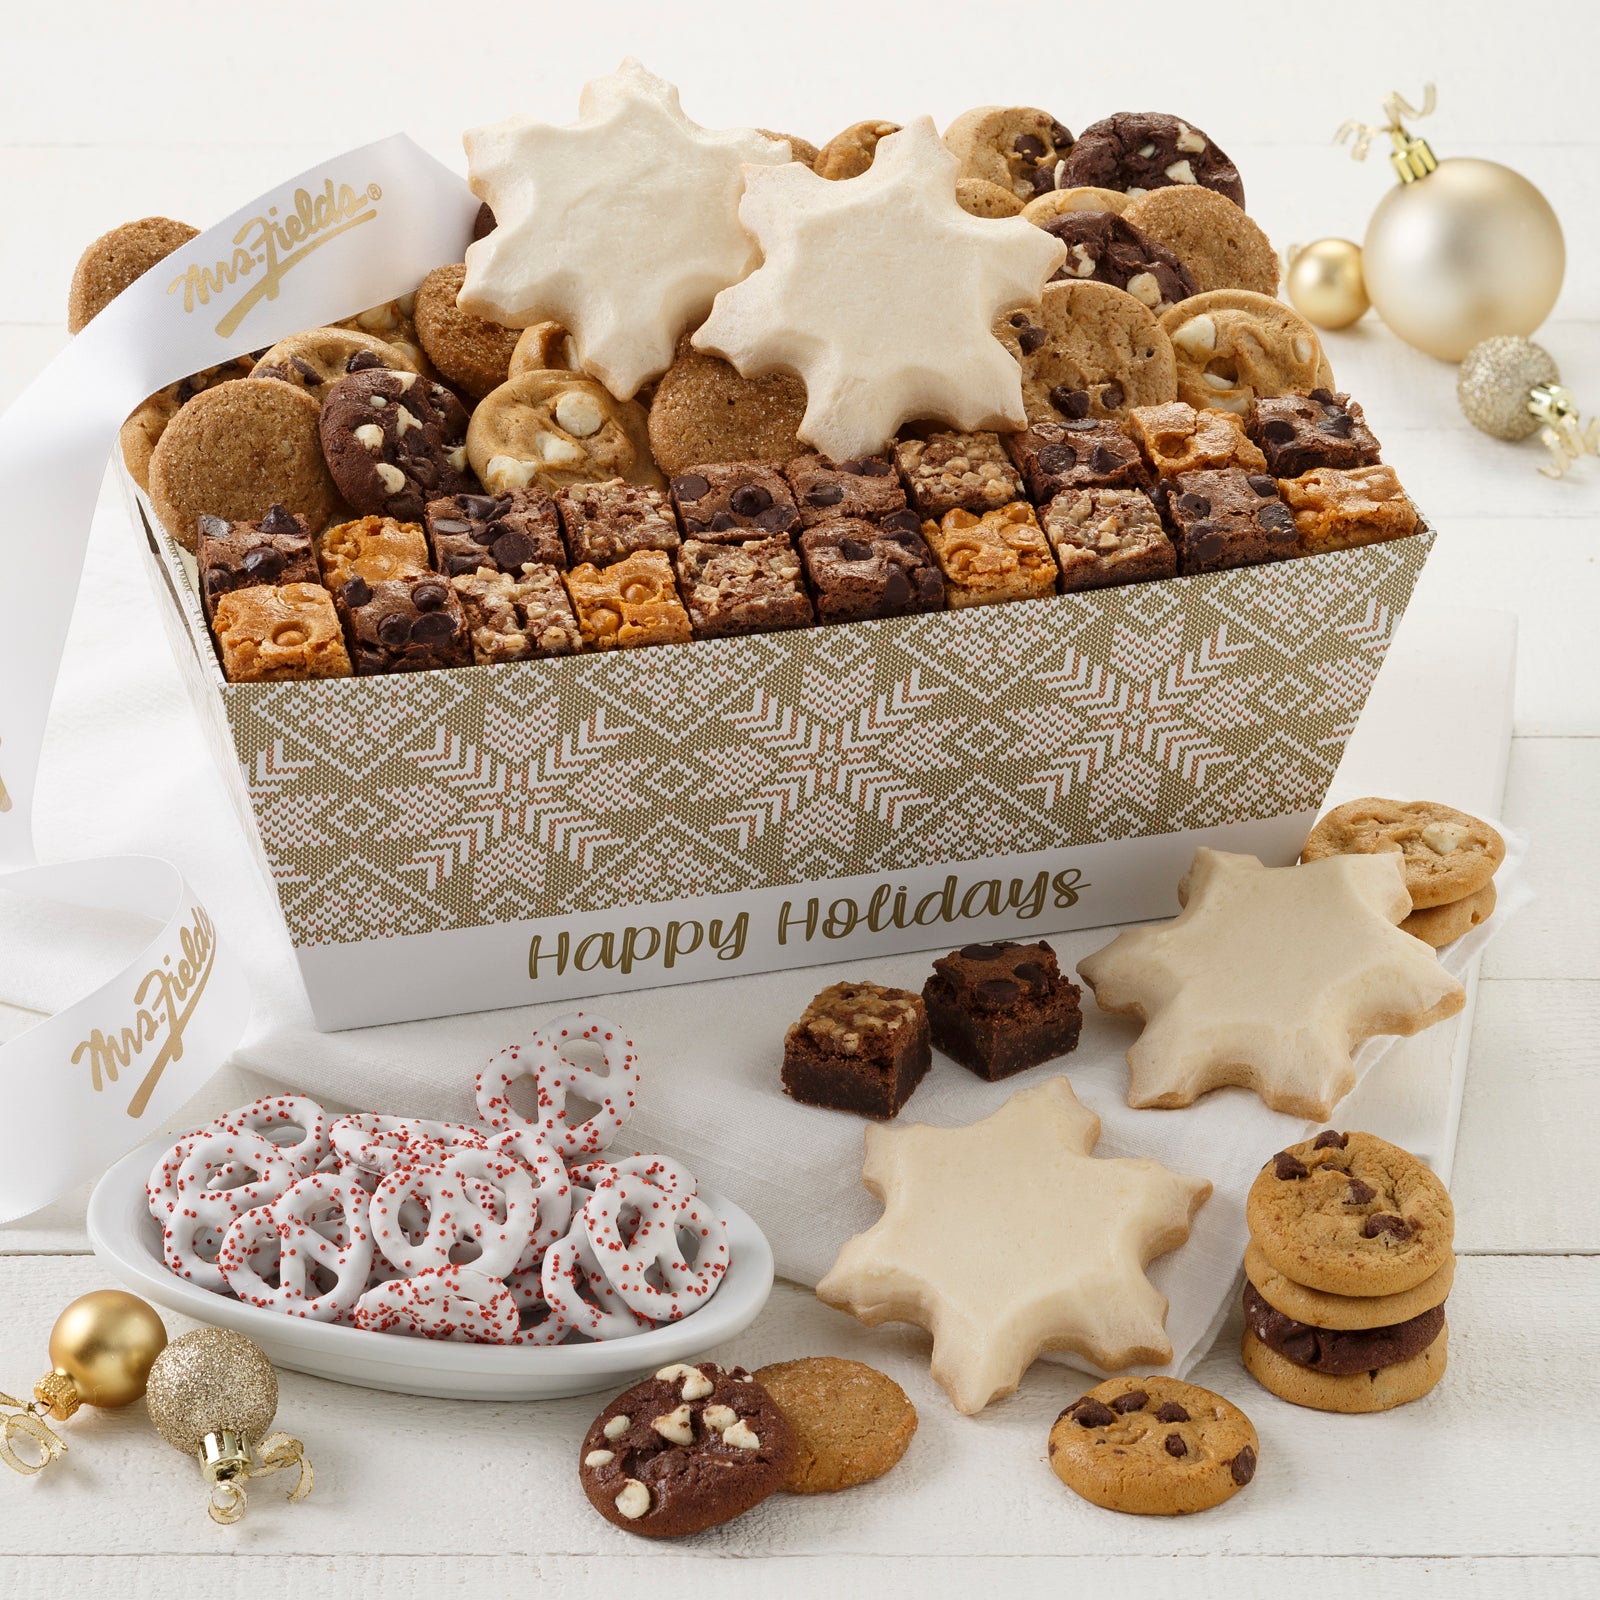 A Happy Holidays crate decorated with a gold and white holiday pattern and filled with an assortment of Nibblers®, brownie bites, four frosted snowflake cookies, and yogurt-covered pretzels.